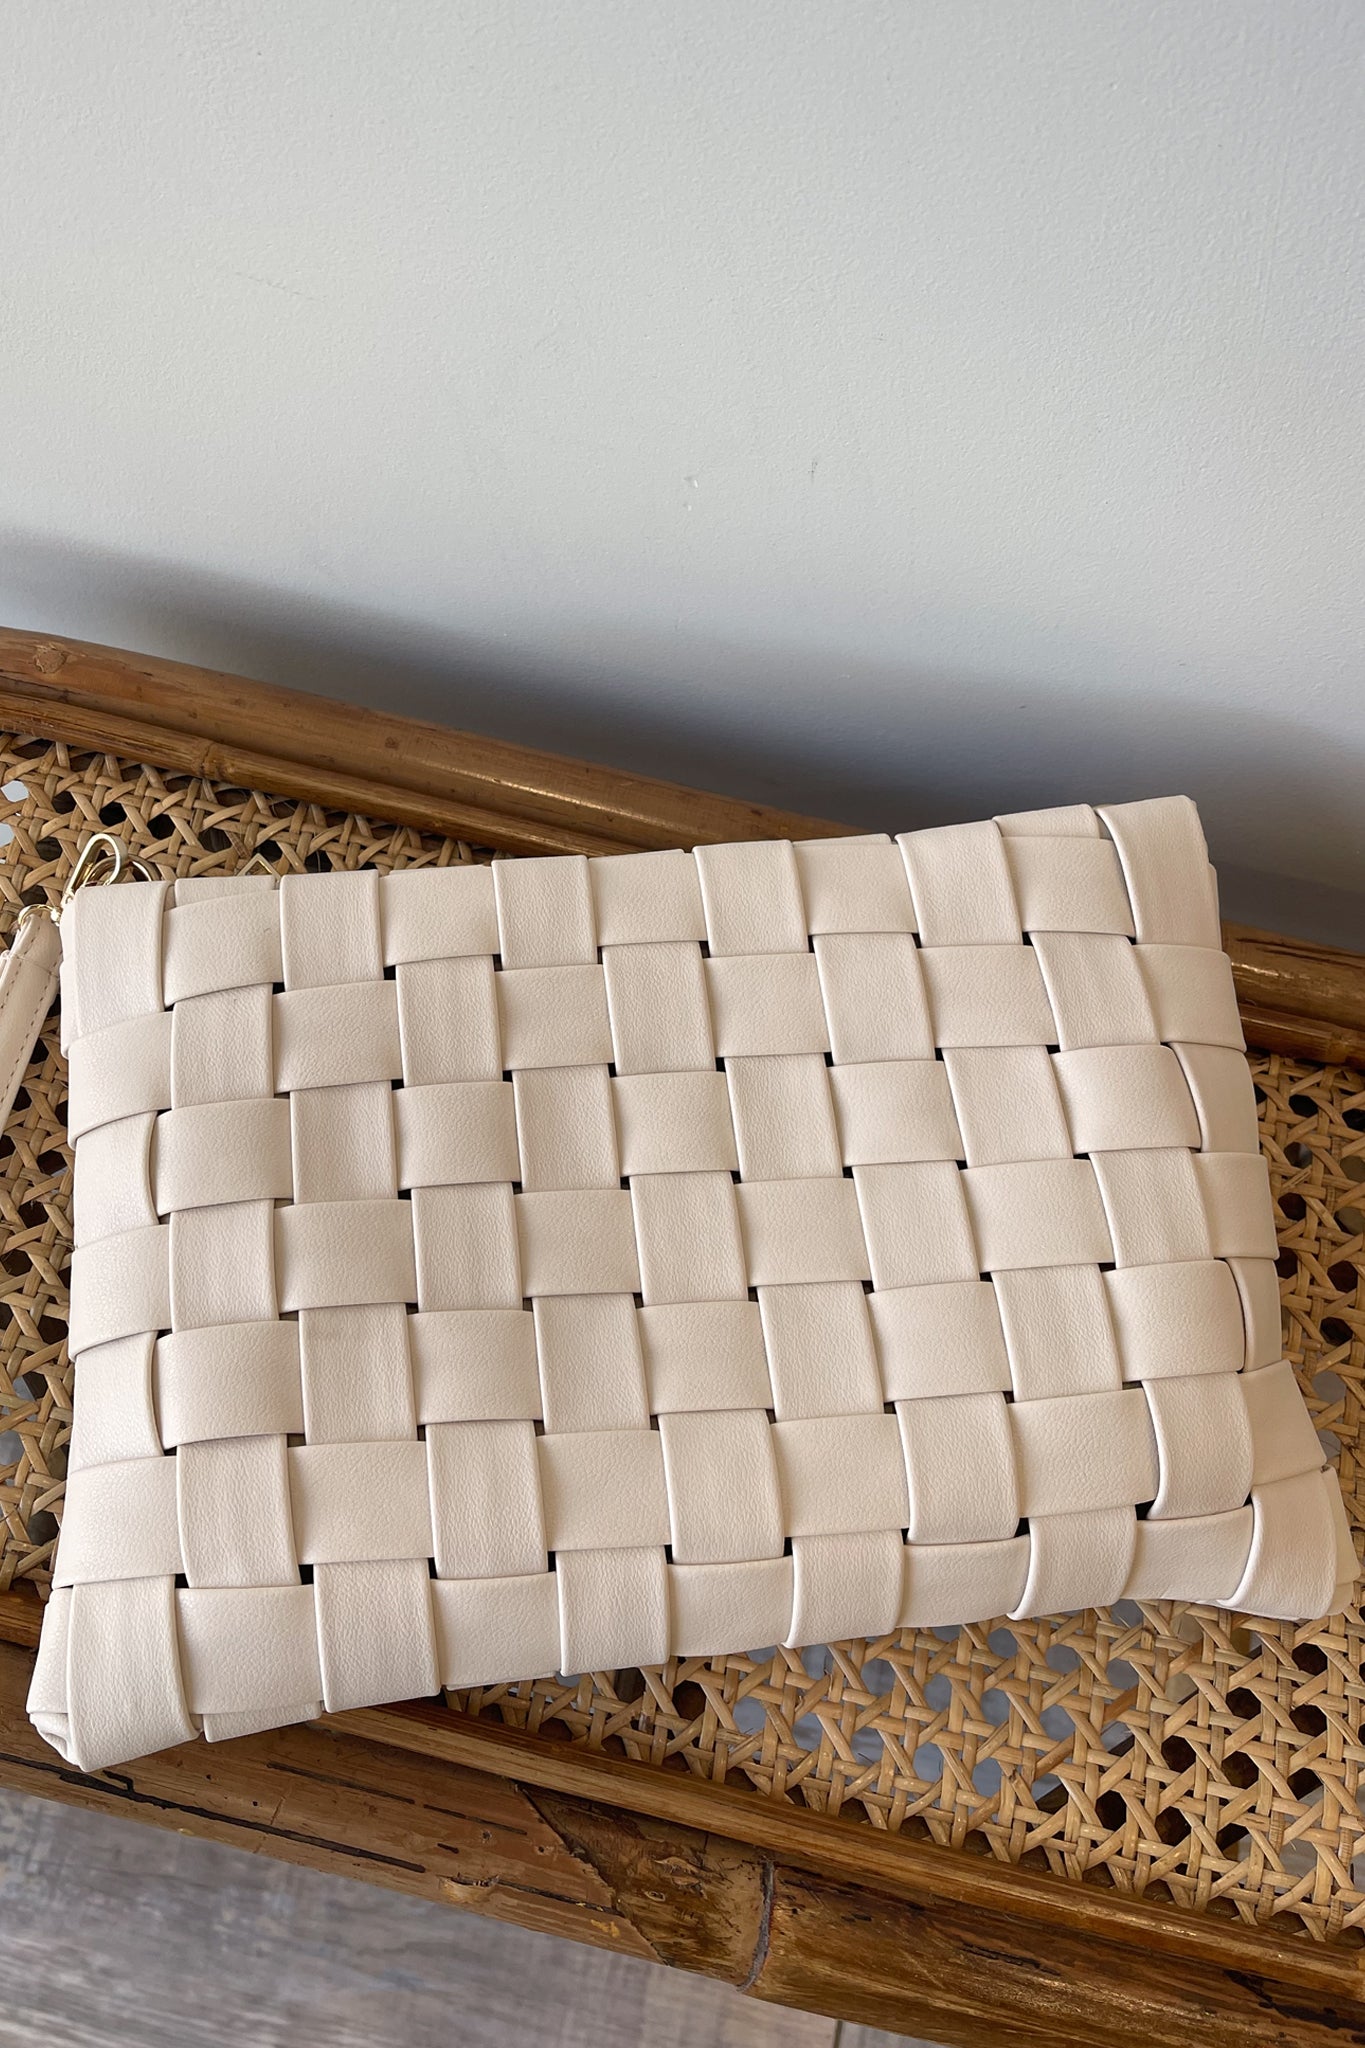 View 3 of Keen Woven Clutch in Ivory, a Bags from Larrea Cove. Detail: .